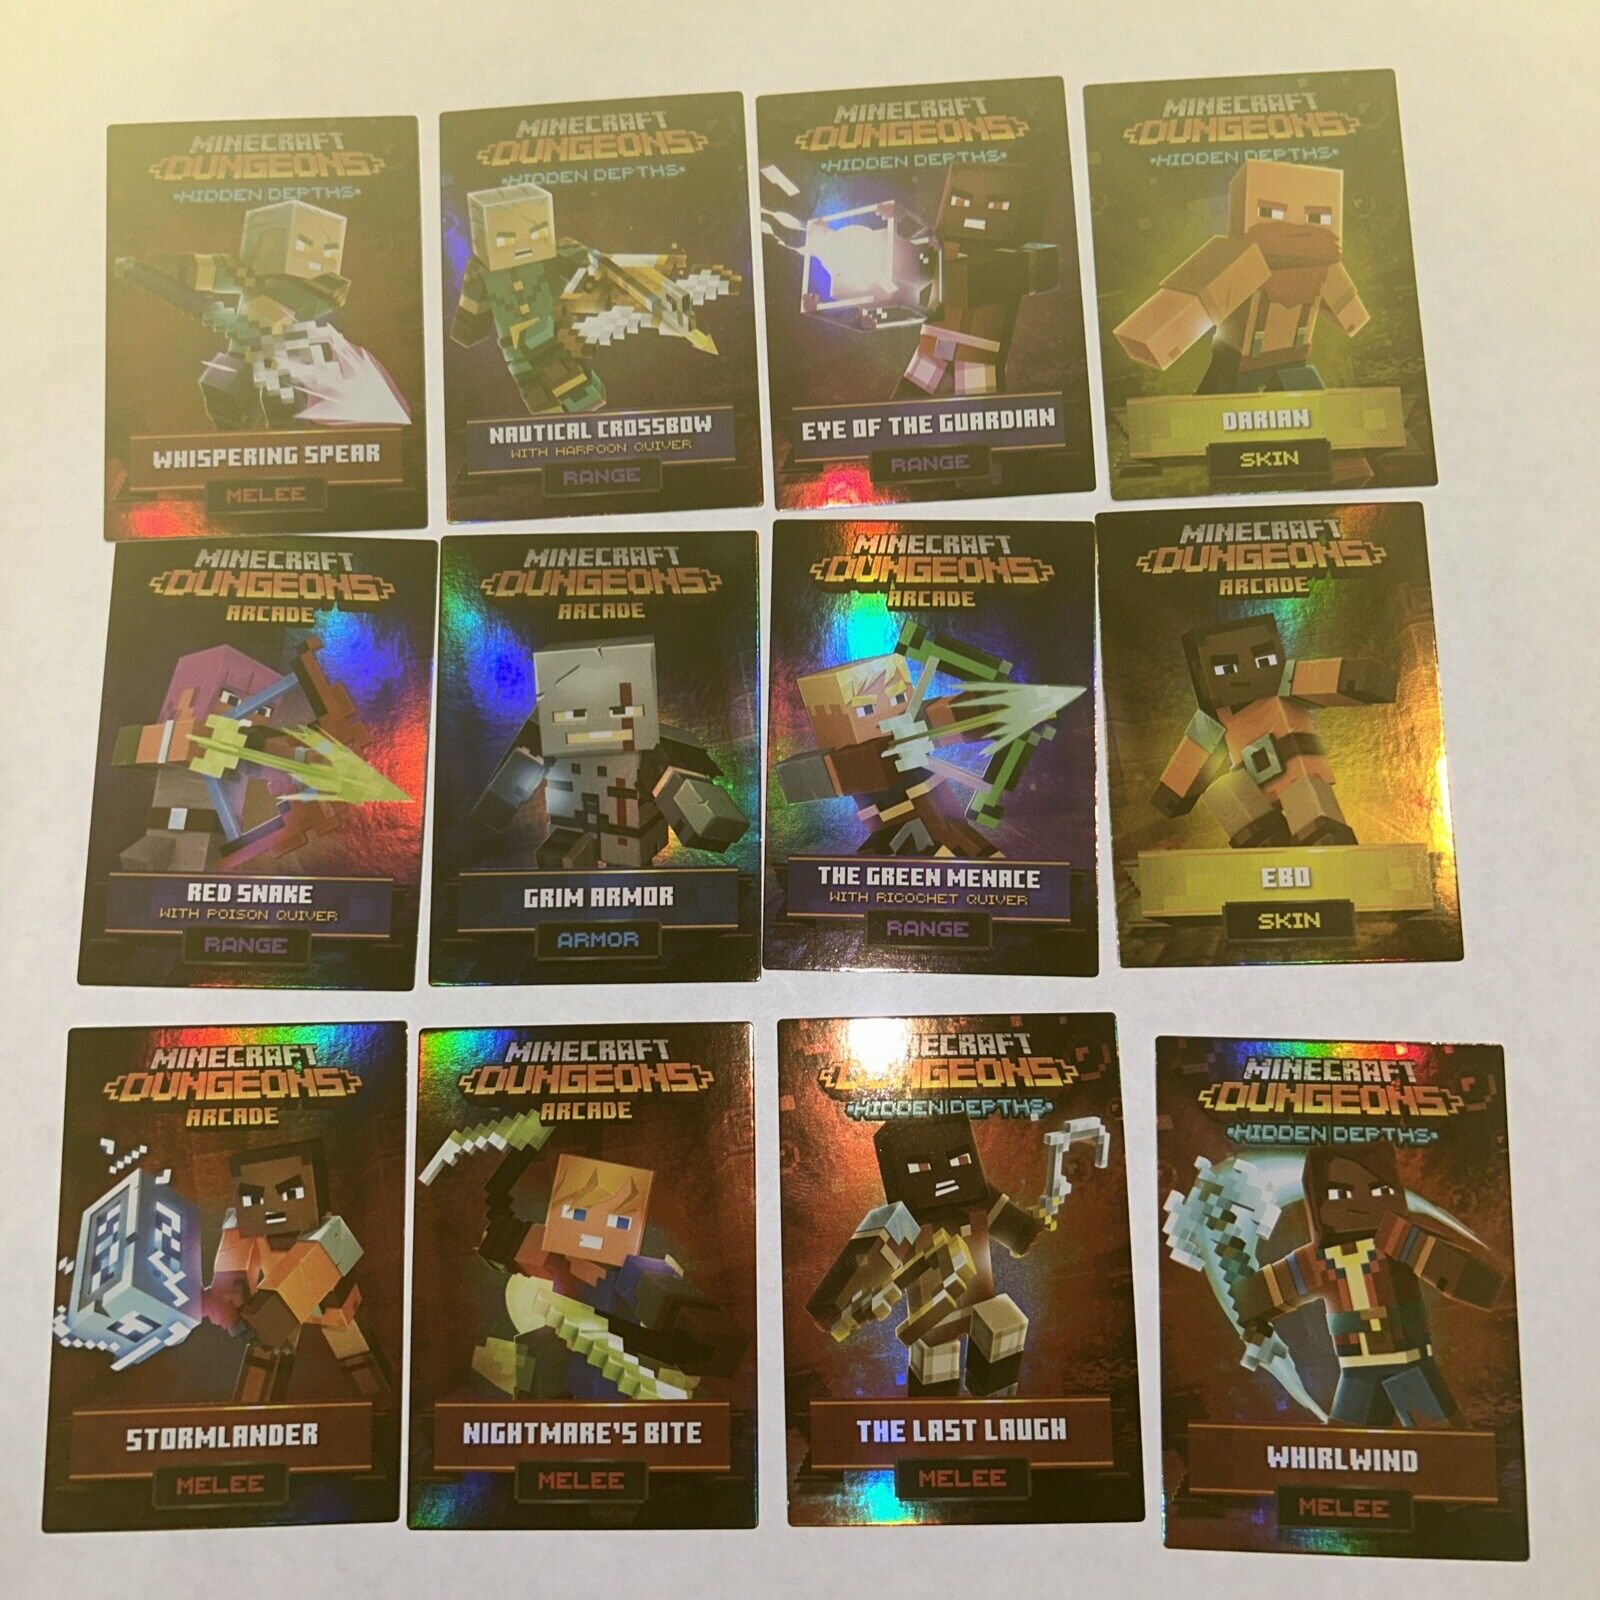 Minecraft Dungeons Arcade Game Twelve Rare FOIL Card(s), Whirlwind + More